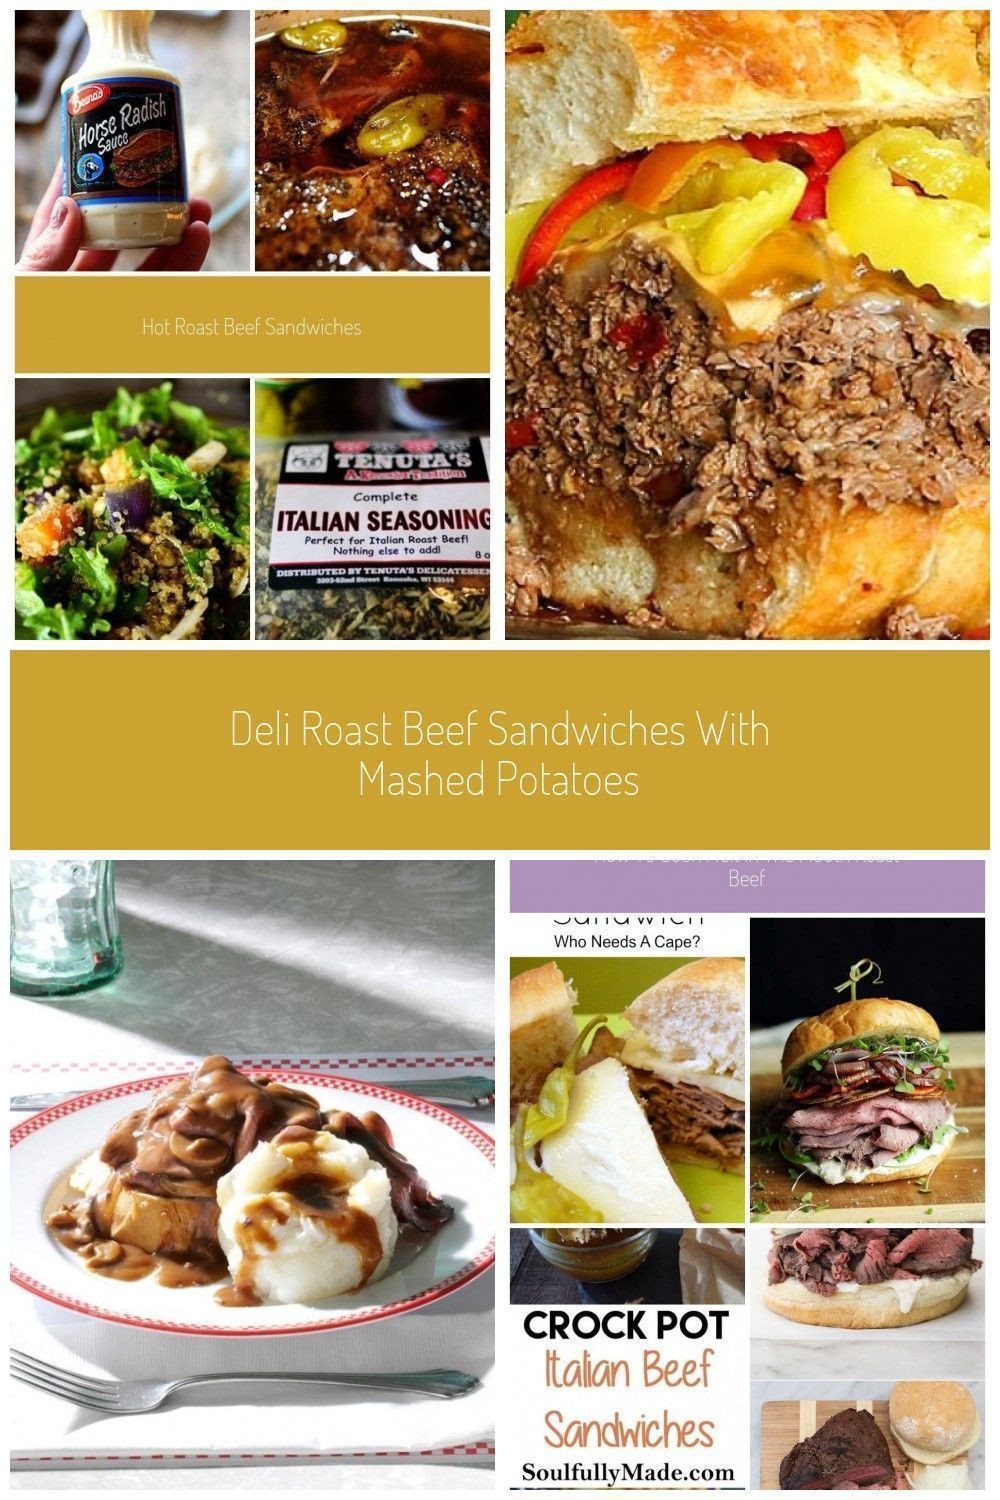 Pioneer Woman Roast Beef Sandwiches
 Mini Hot Ham Sandwiches by Ree Drummond The Pioneer